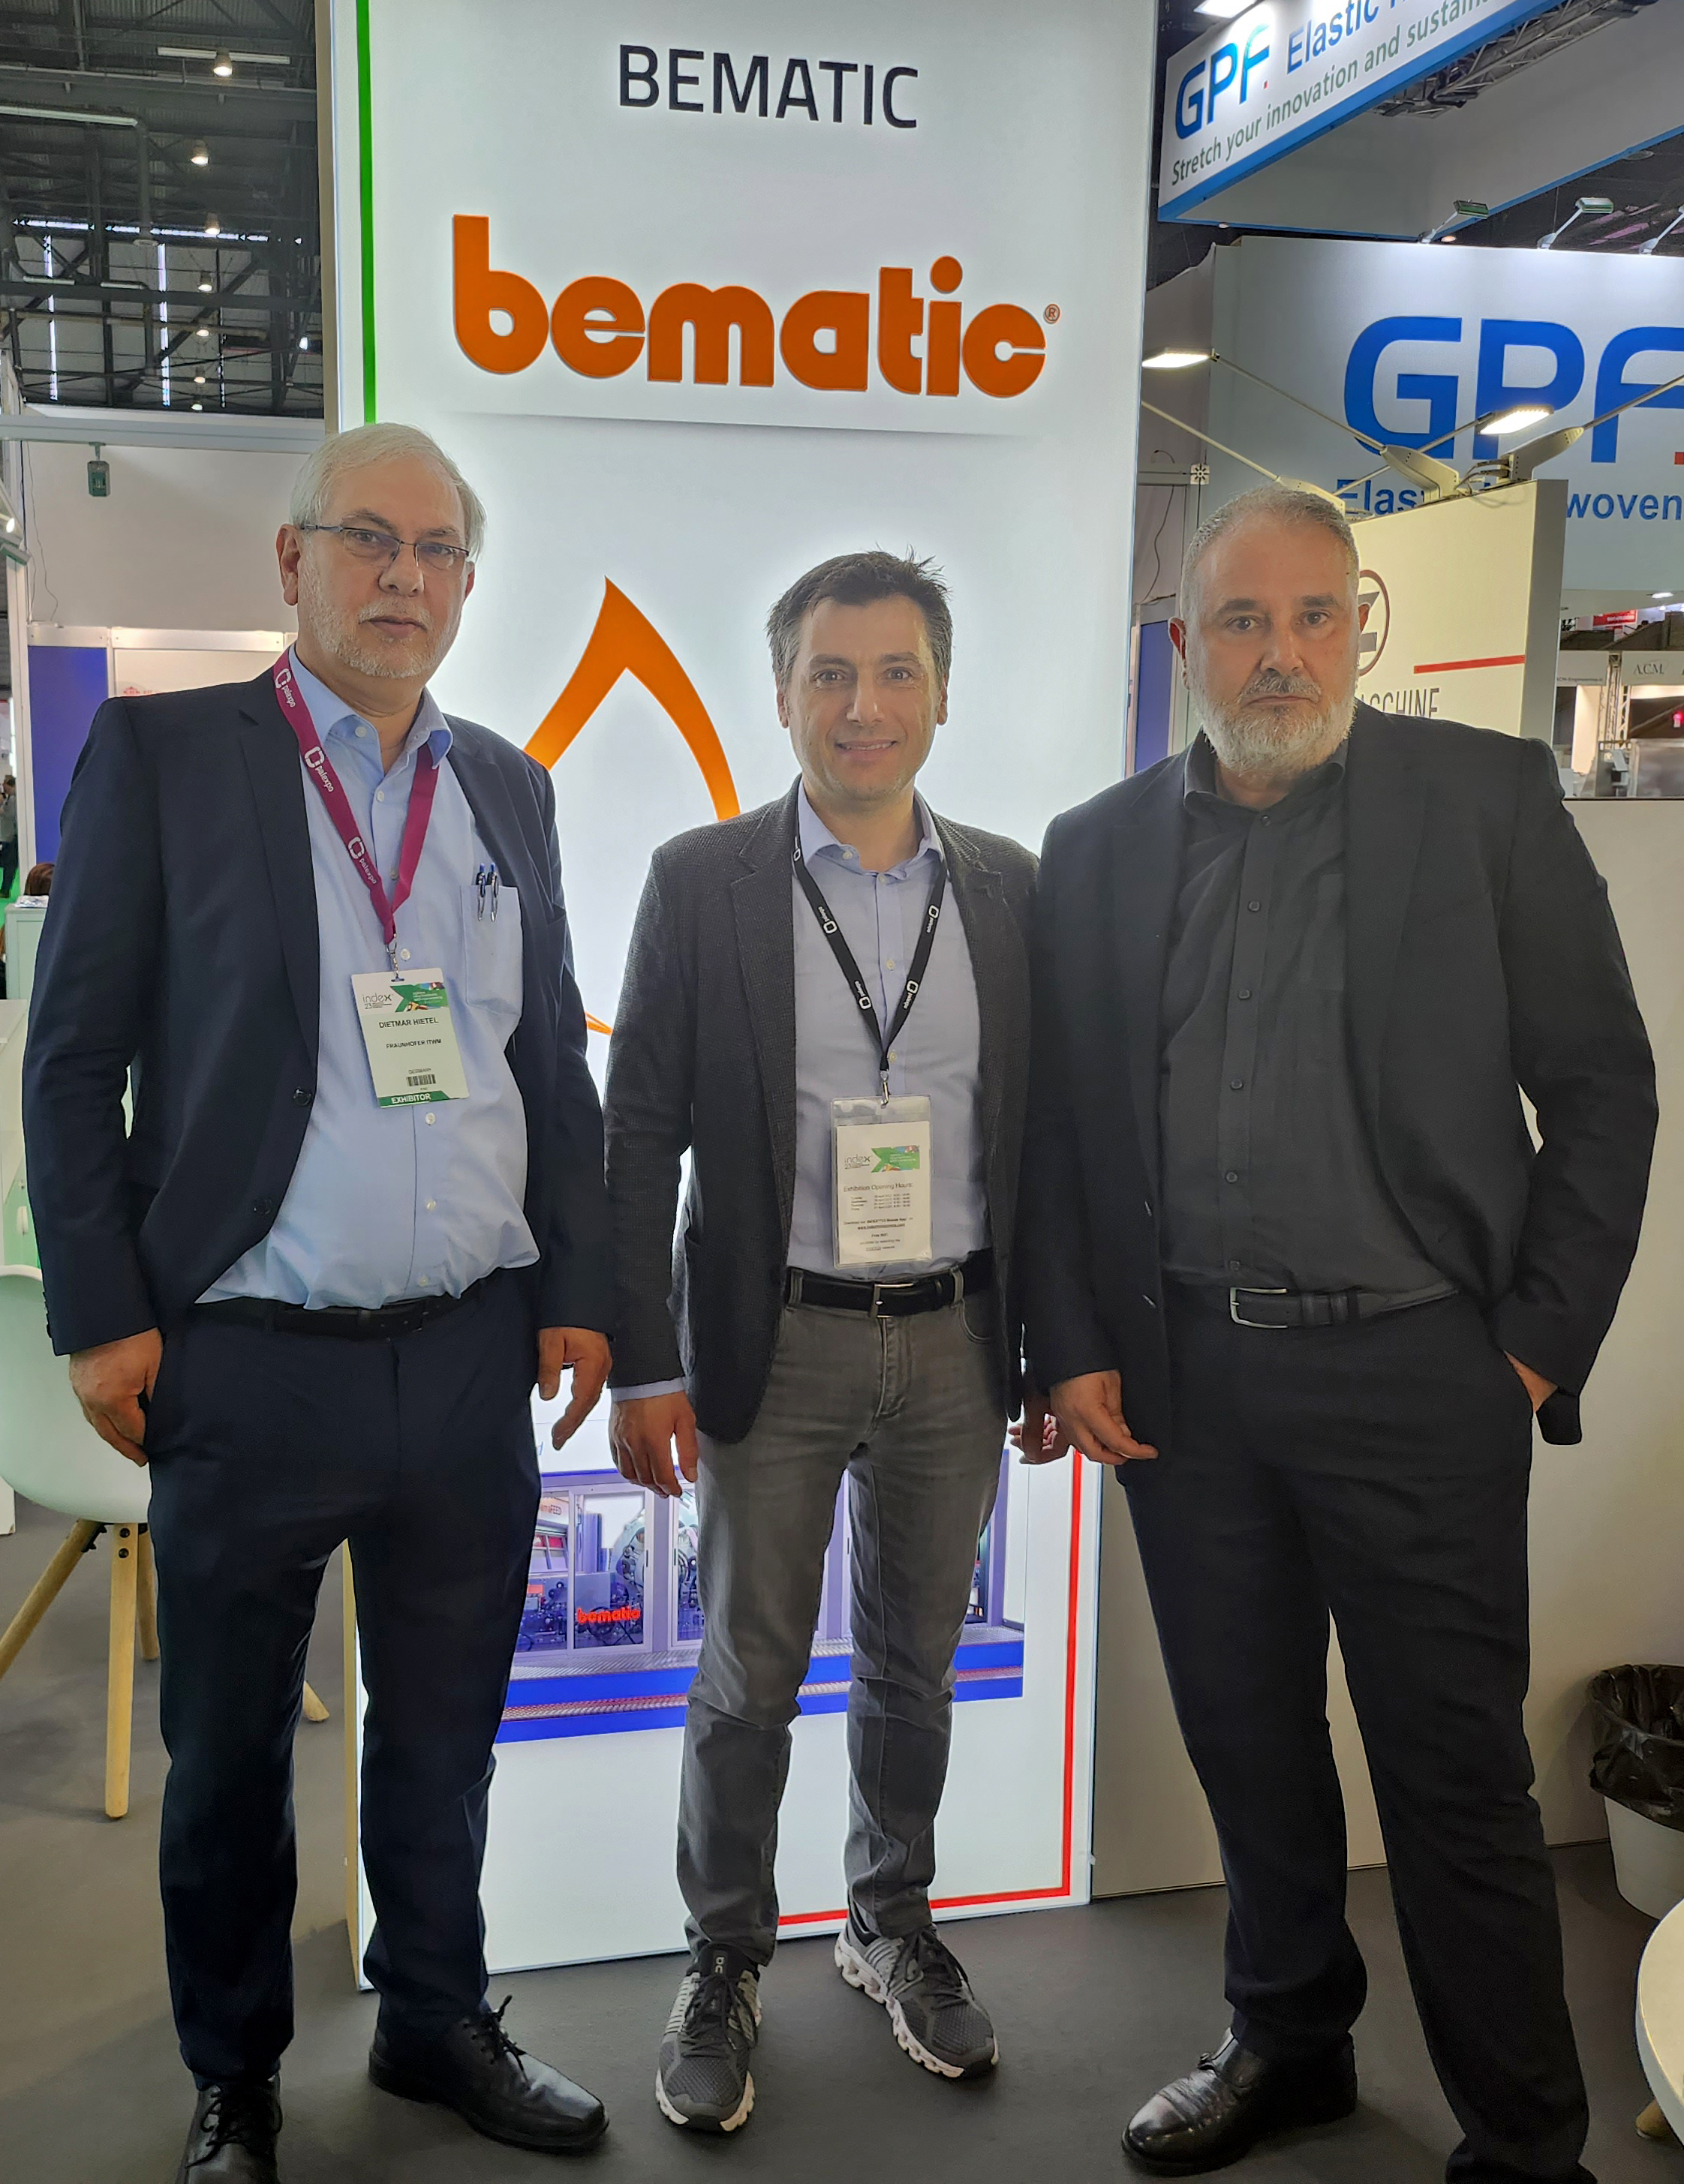 From now on, they will be pooling their expertise: Dr. Dietmar Hietel (Fraunhofer ITWM) Giovanni Di Lorenzo (Siriotek) and Giovanni Bettarini (bematic).